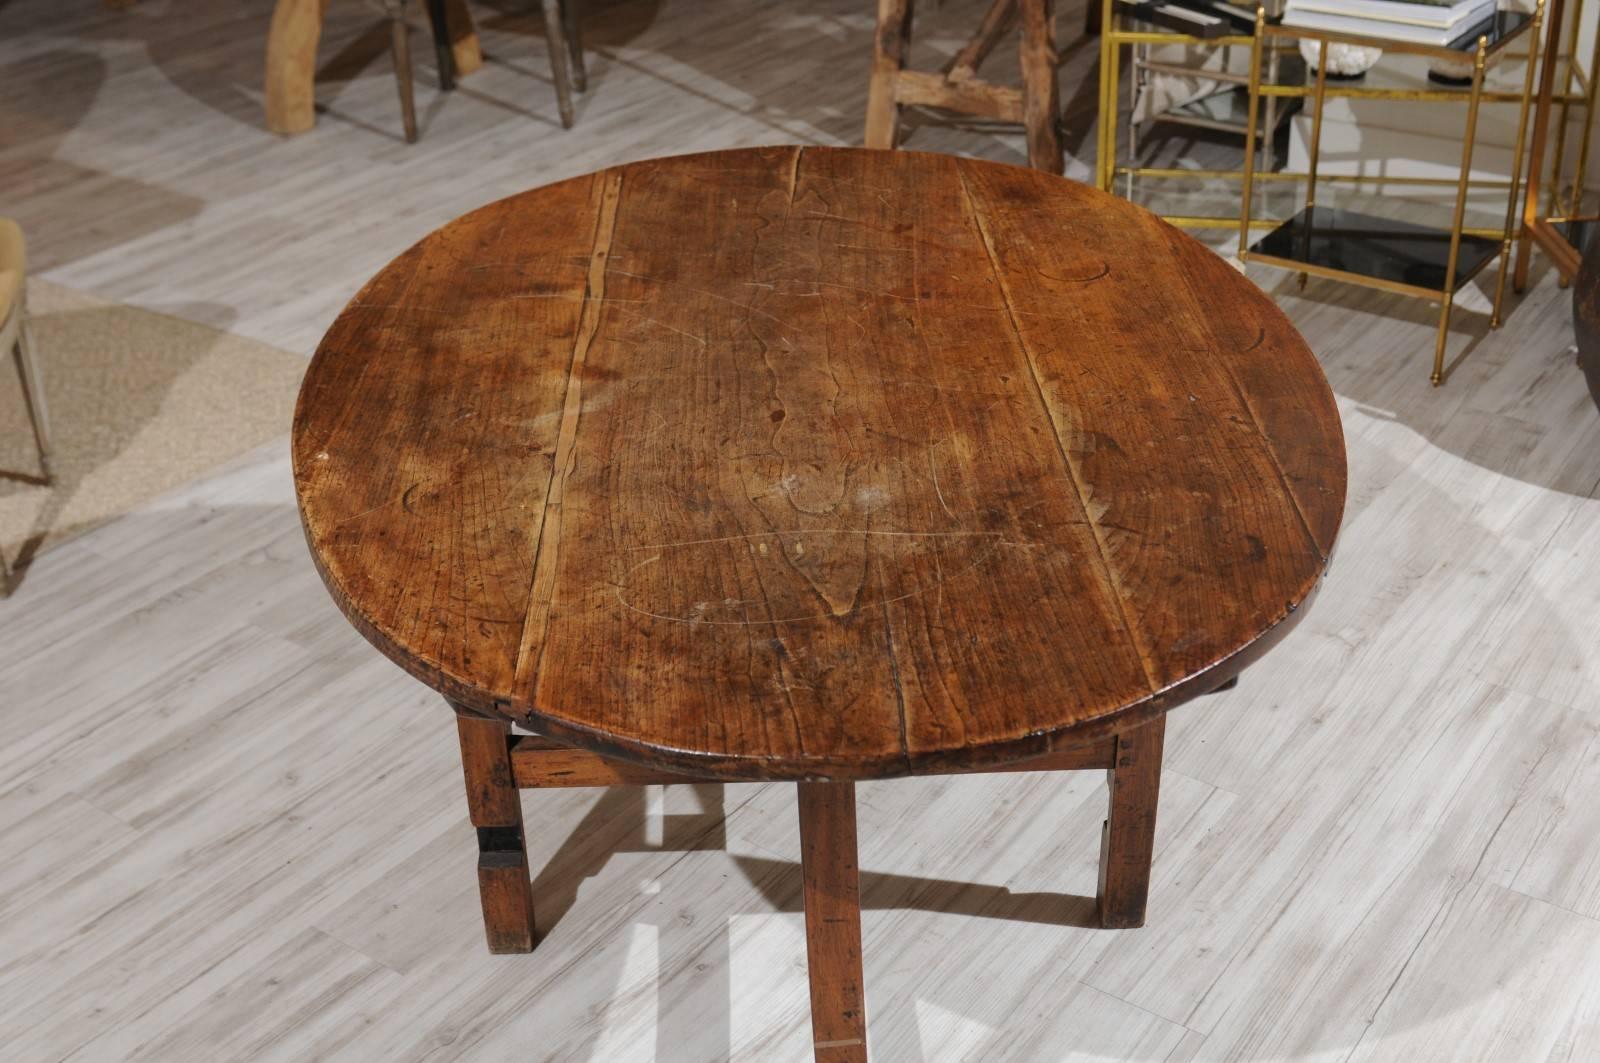 Rustic Large French Tilt-Top Oval Shaped Wine Tasting Table from the 19th Century